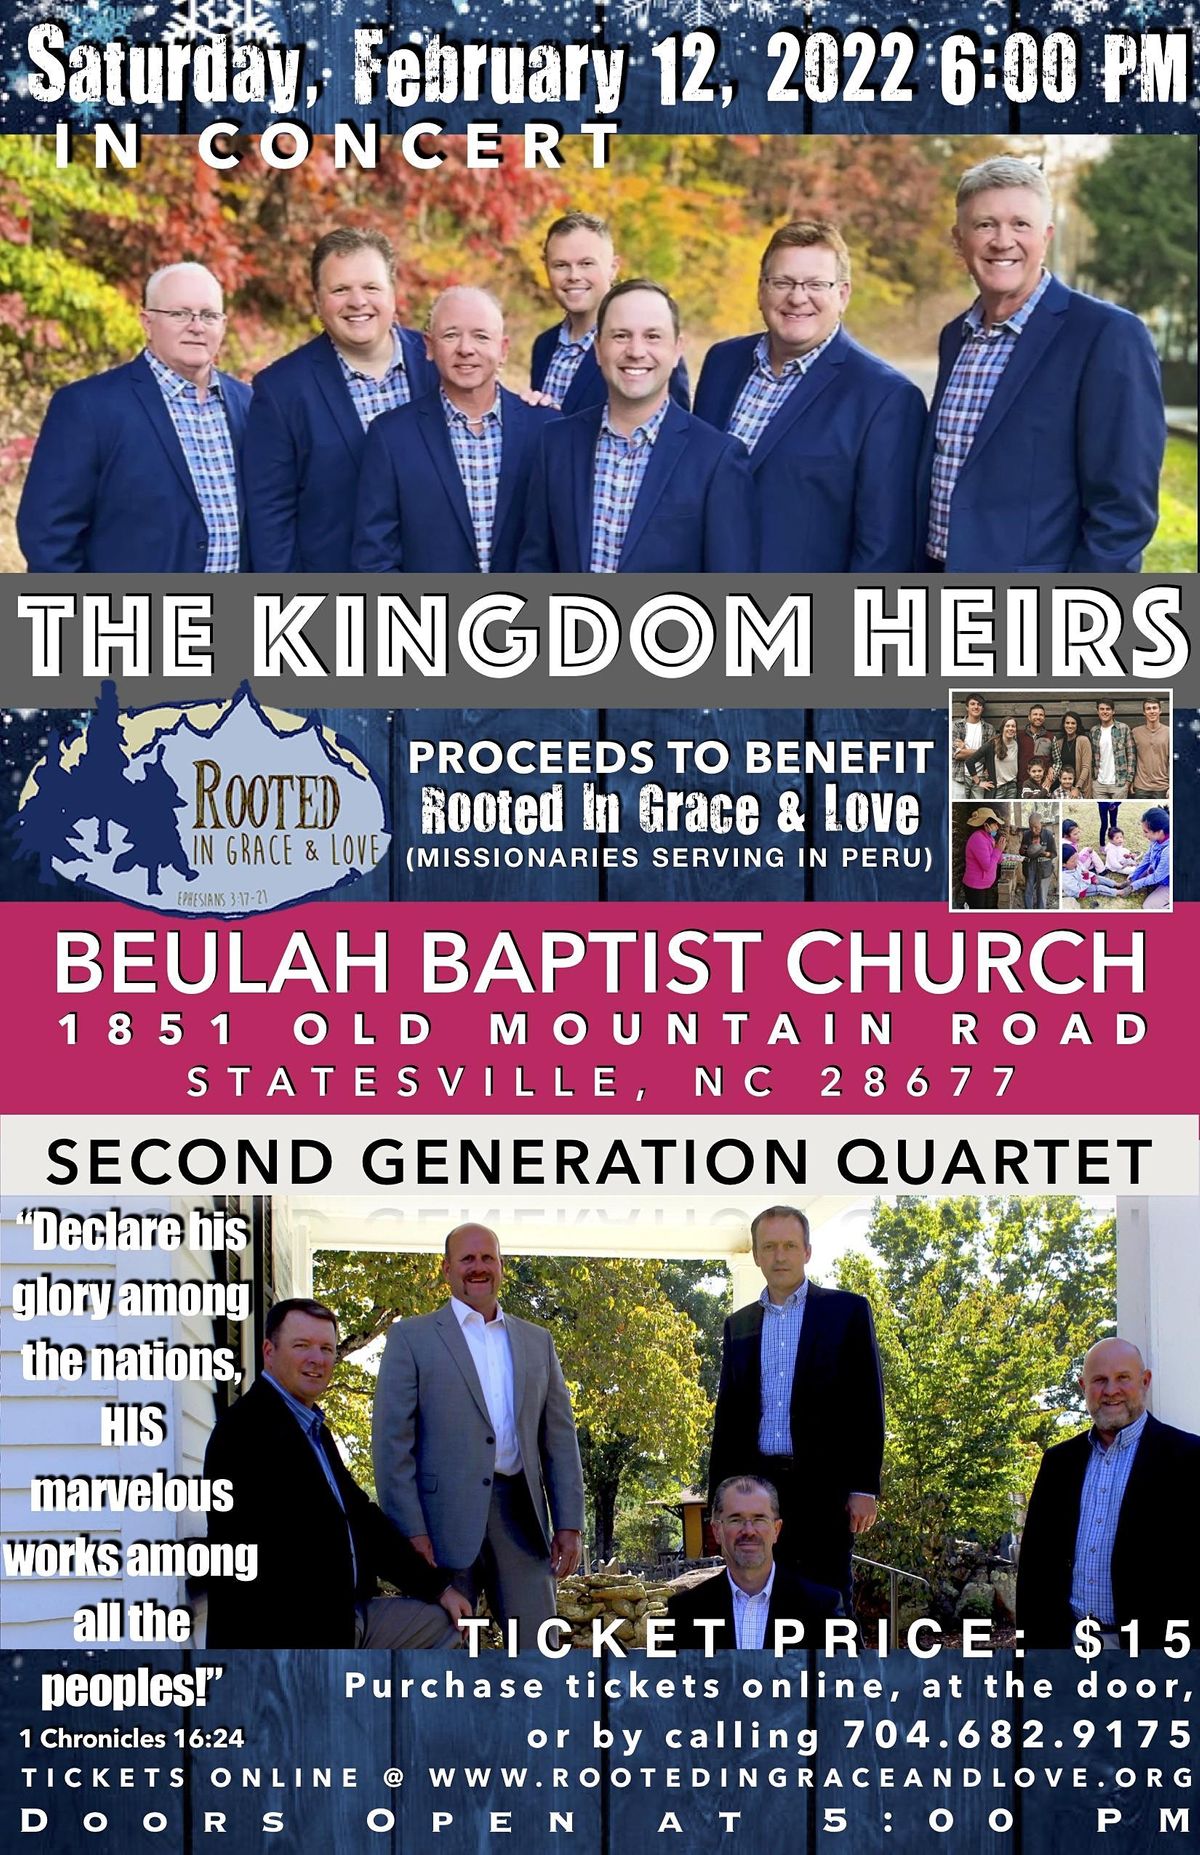 Kingdom Heirs Schedule 2022 The Kingdom Heirs And Second Generation Quartet | Beulah Baptist Church,  Statesville, Nc | February 12, 2022